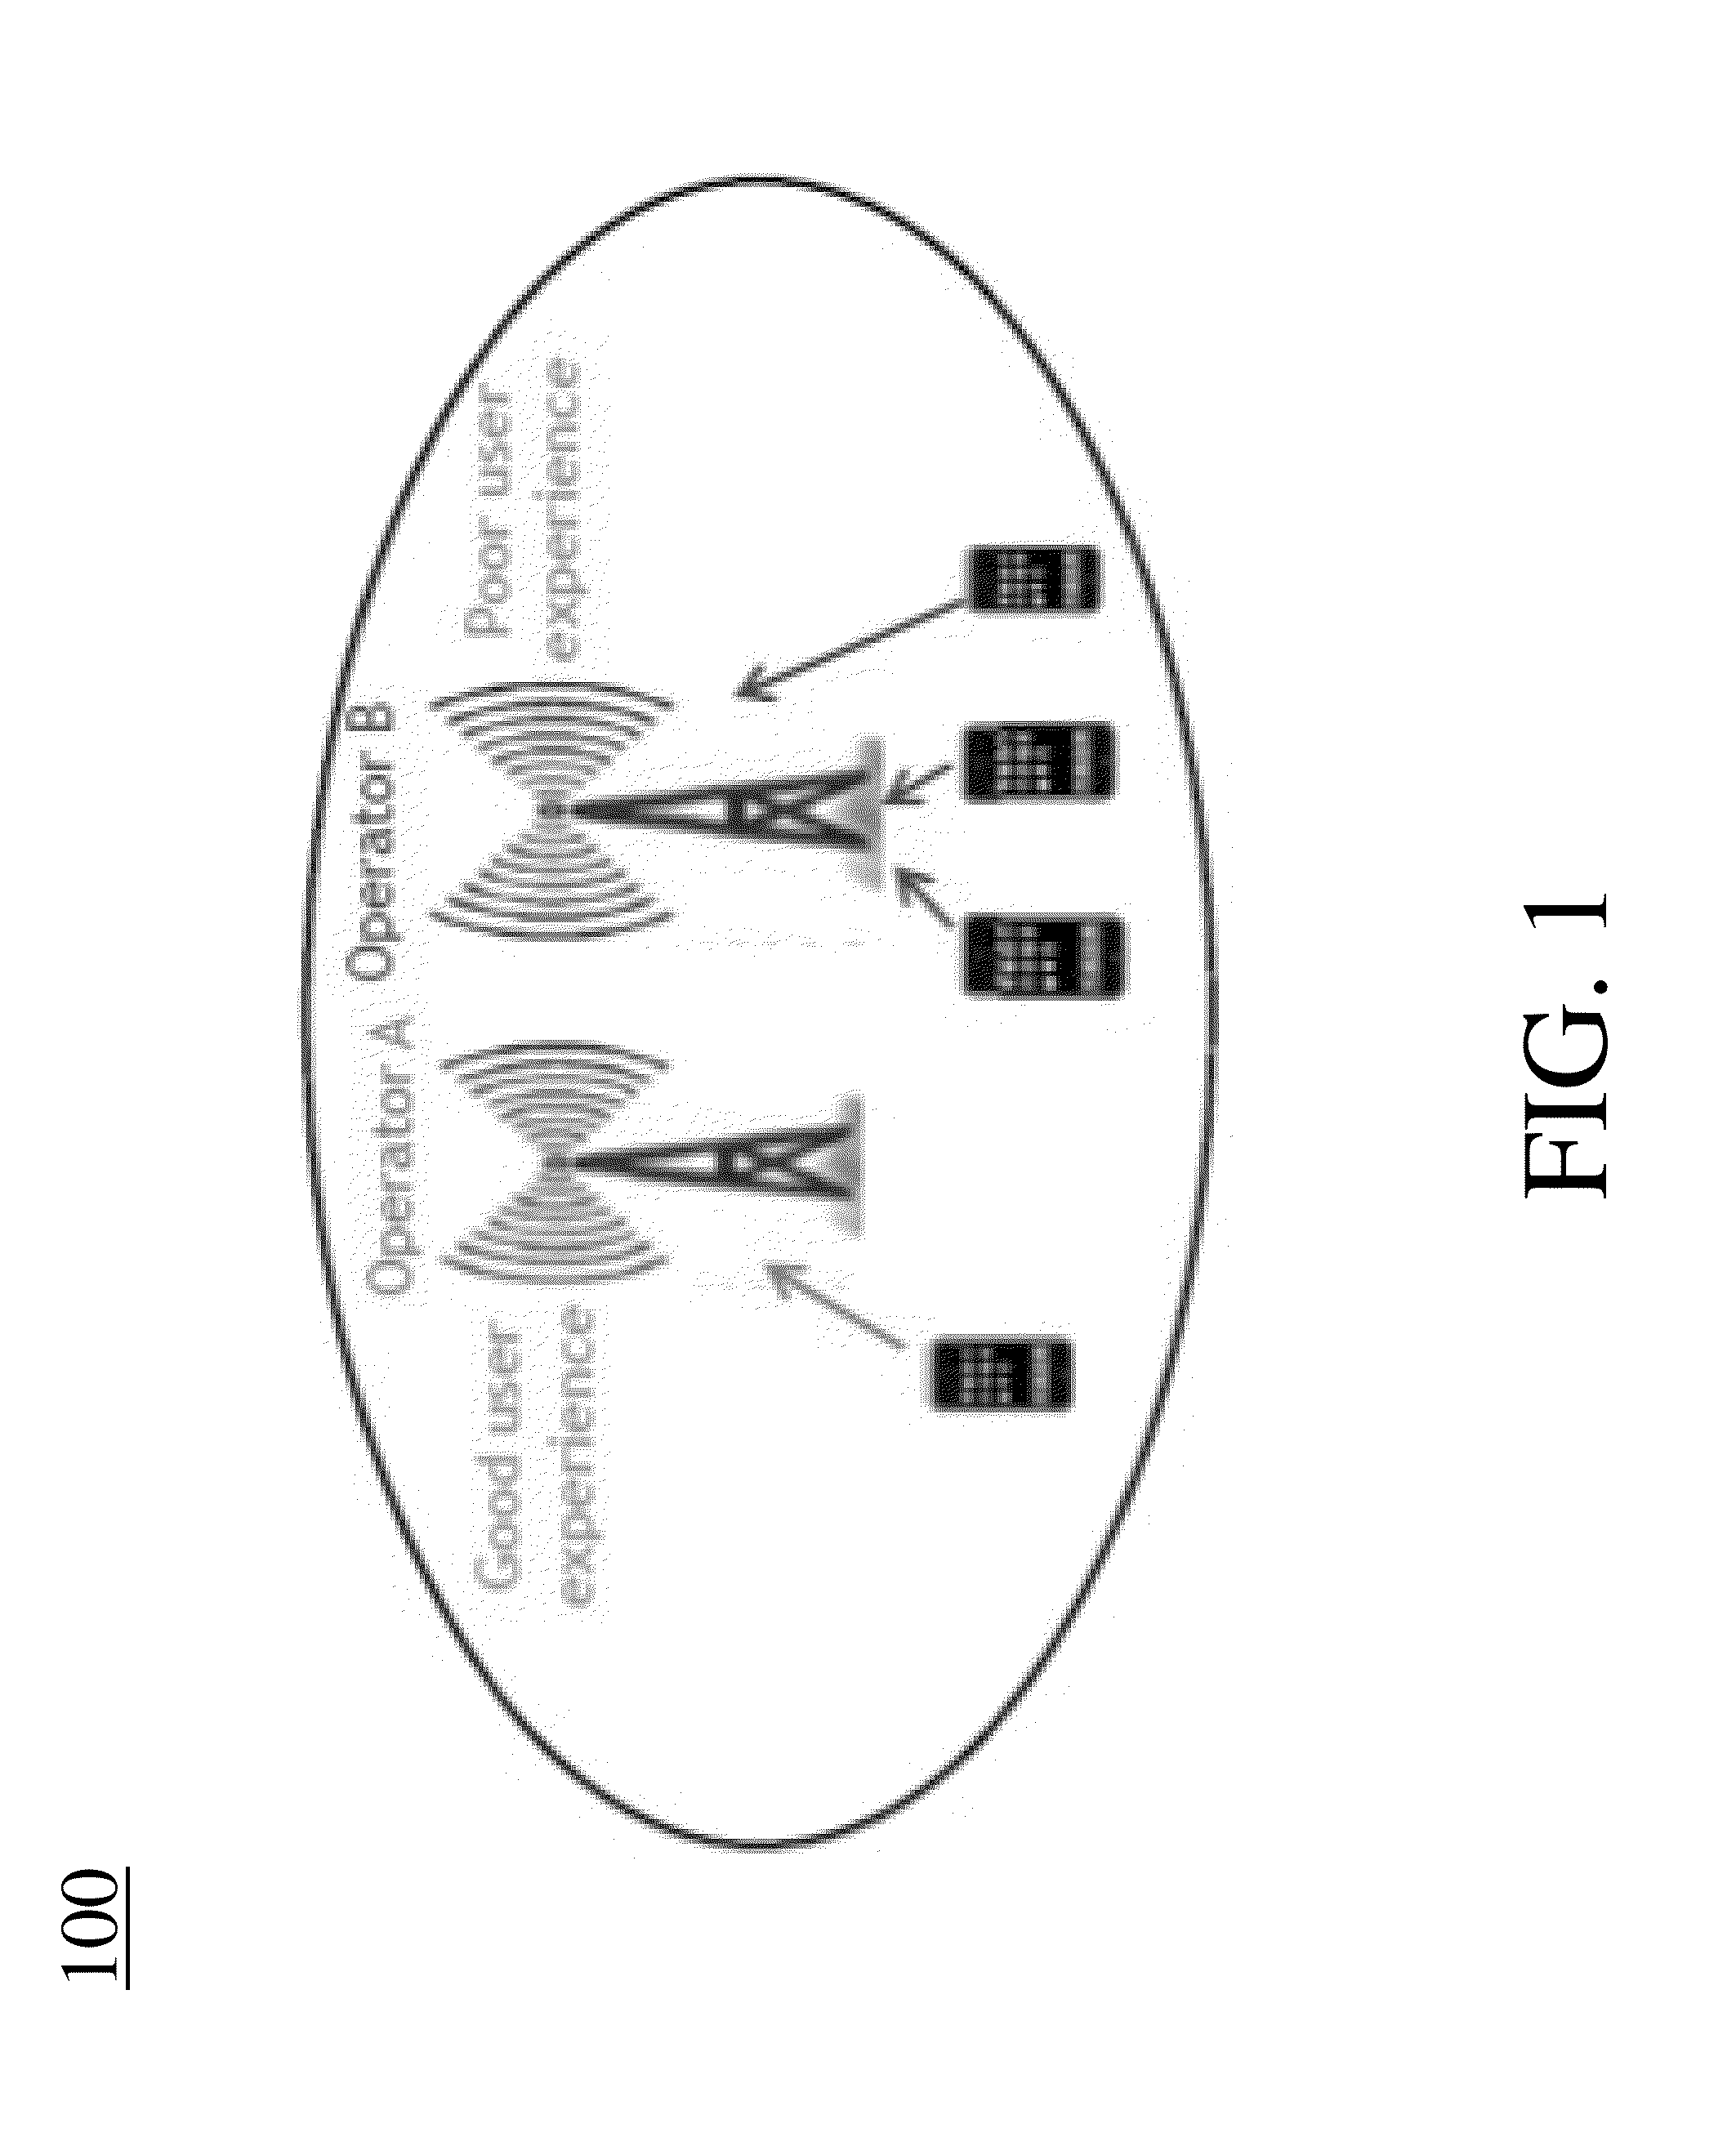 Method And Apparatus For Spectrum Sharing Among Operators